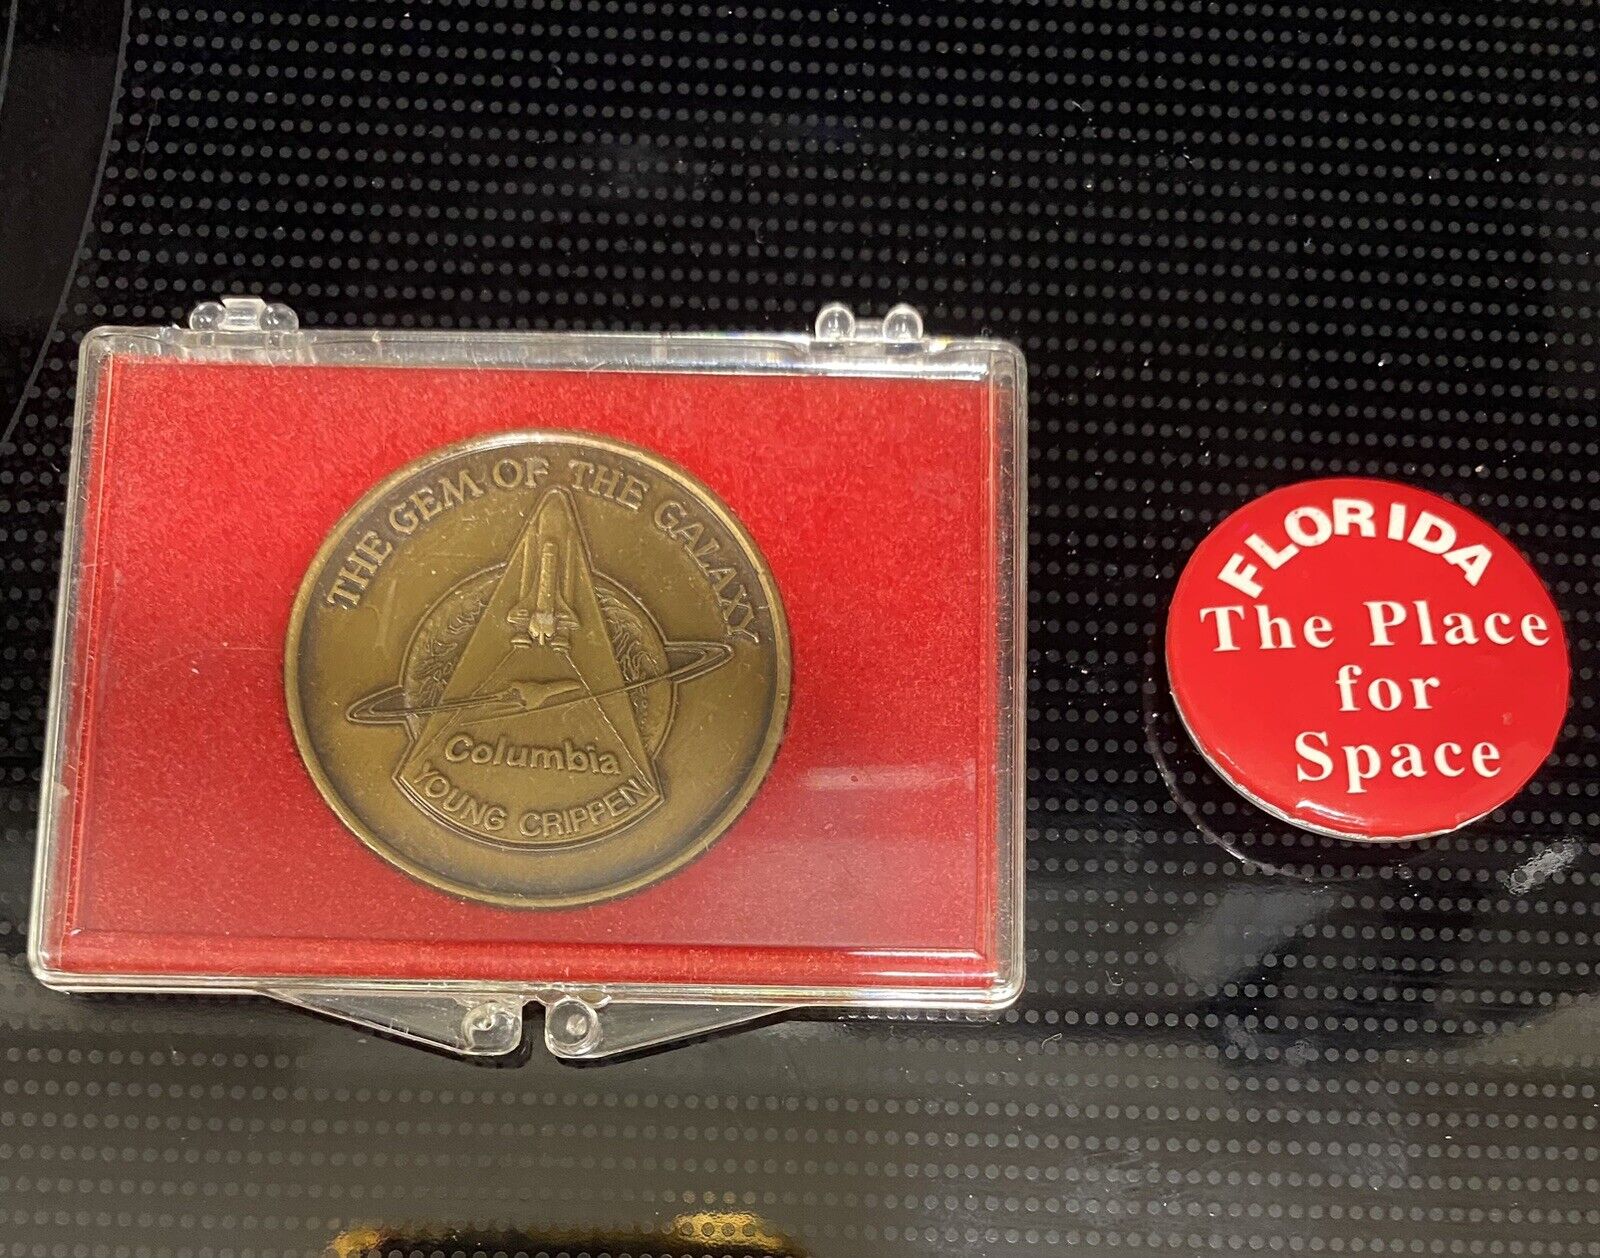 Vintage Columbia/ The Gem Of The Galaxy Coin & The Place For Space Pin